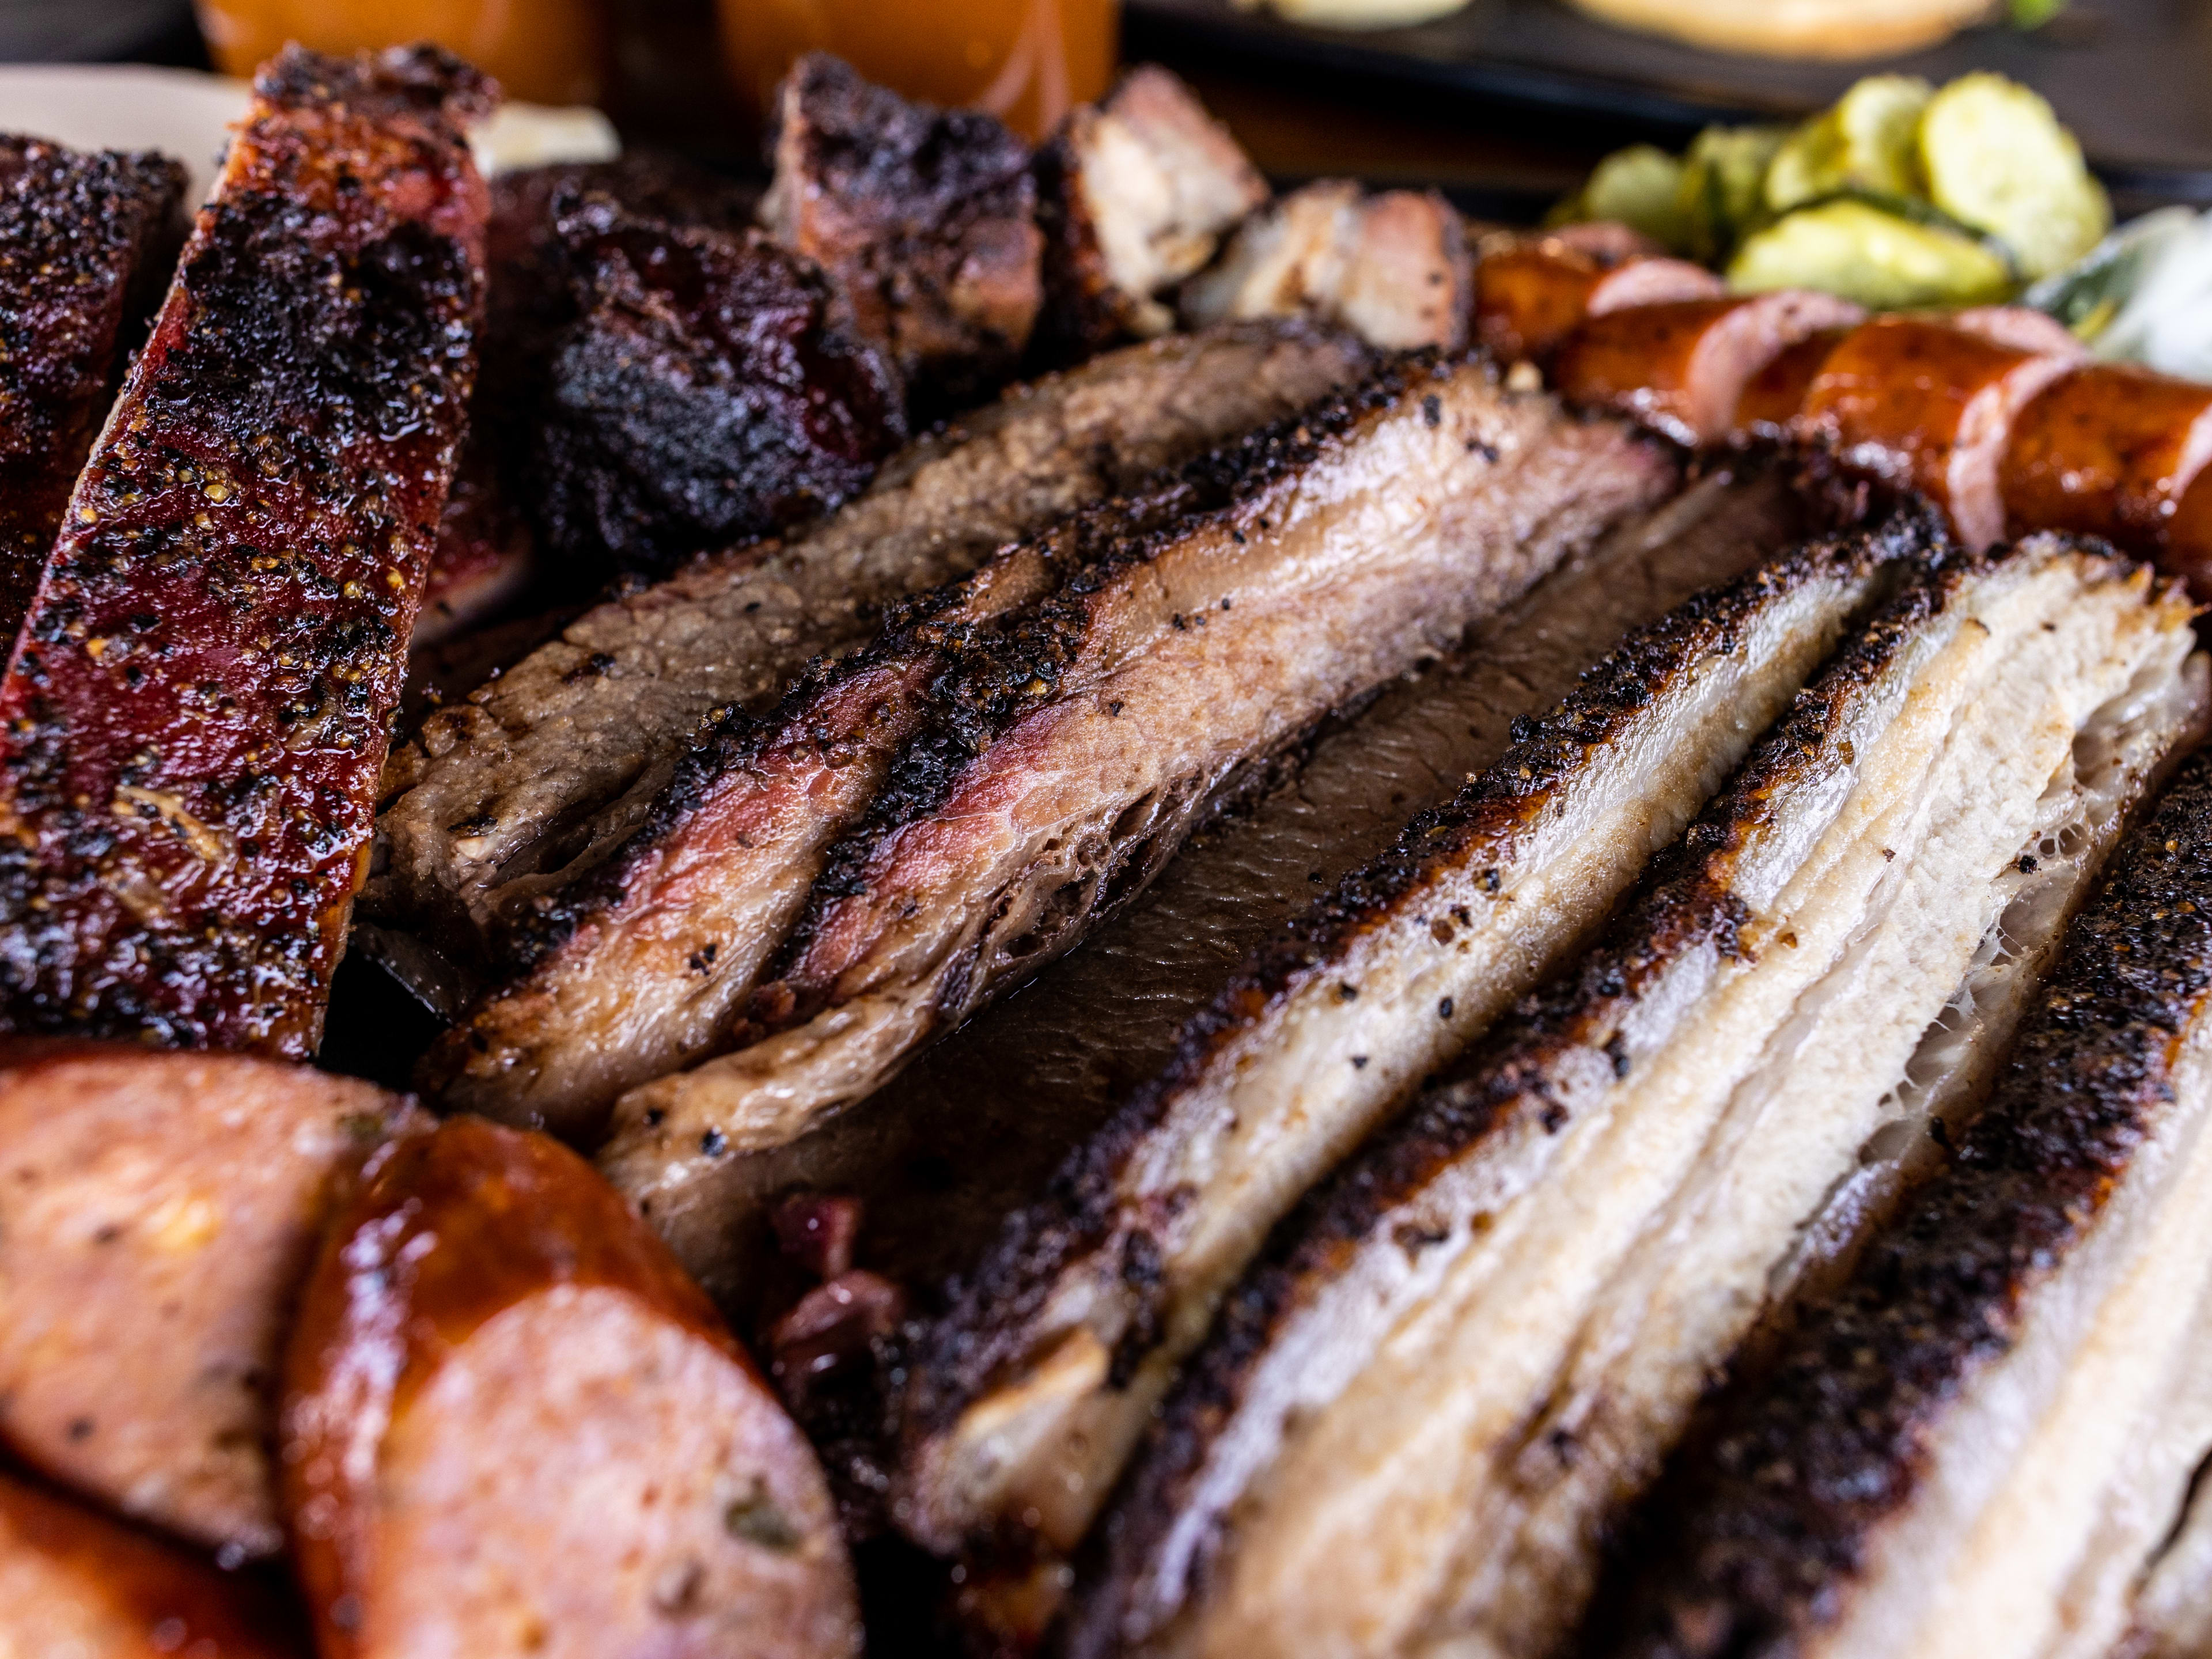 A platter of smoked meats from moreno barbecue.